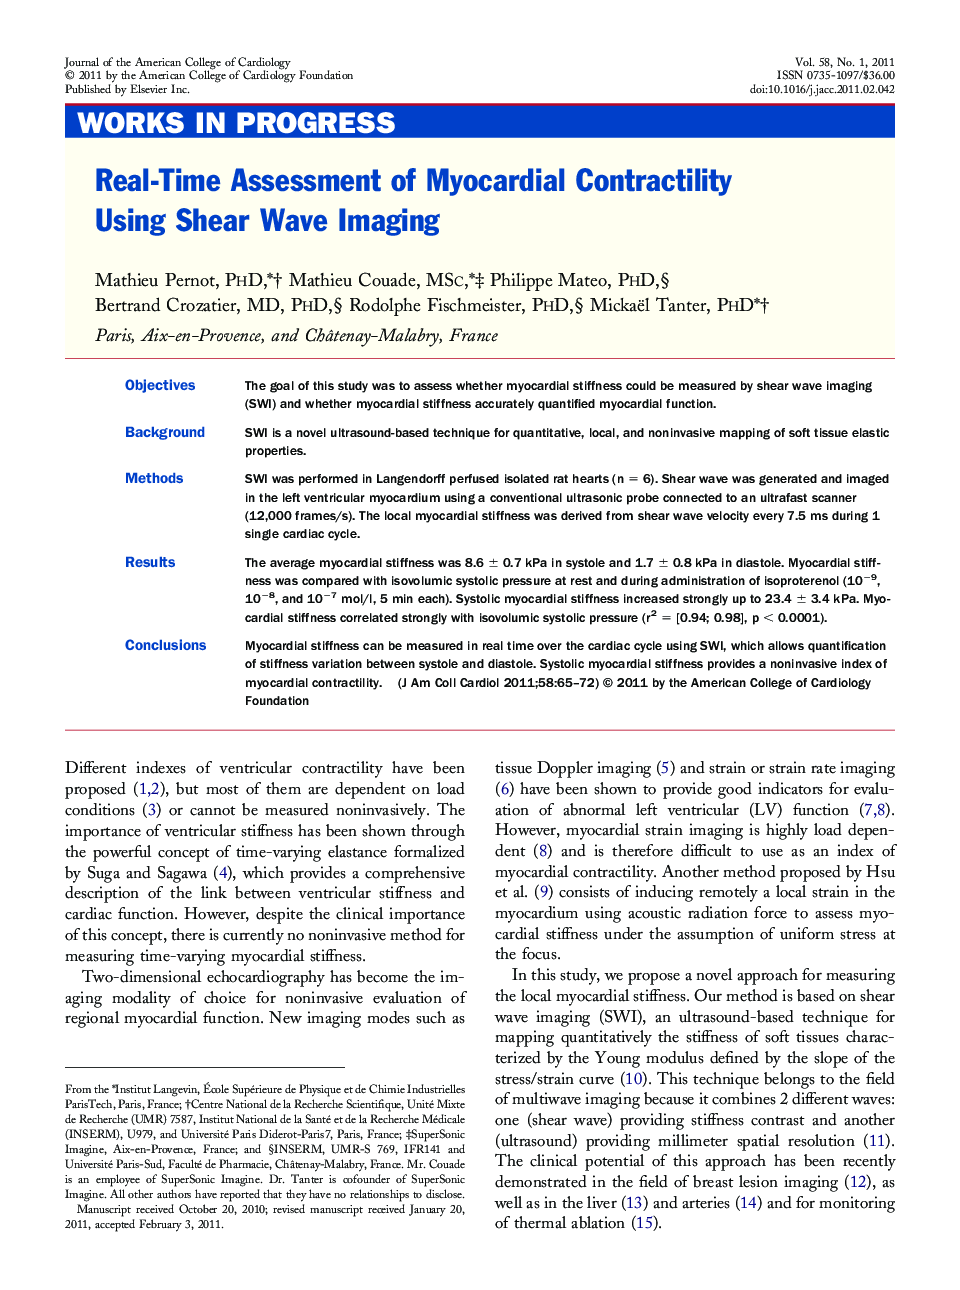 Real-Time Assessment of Myocardial Contractility Using Shear Wave Imaging 